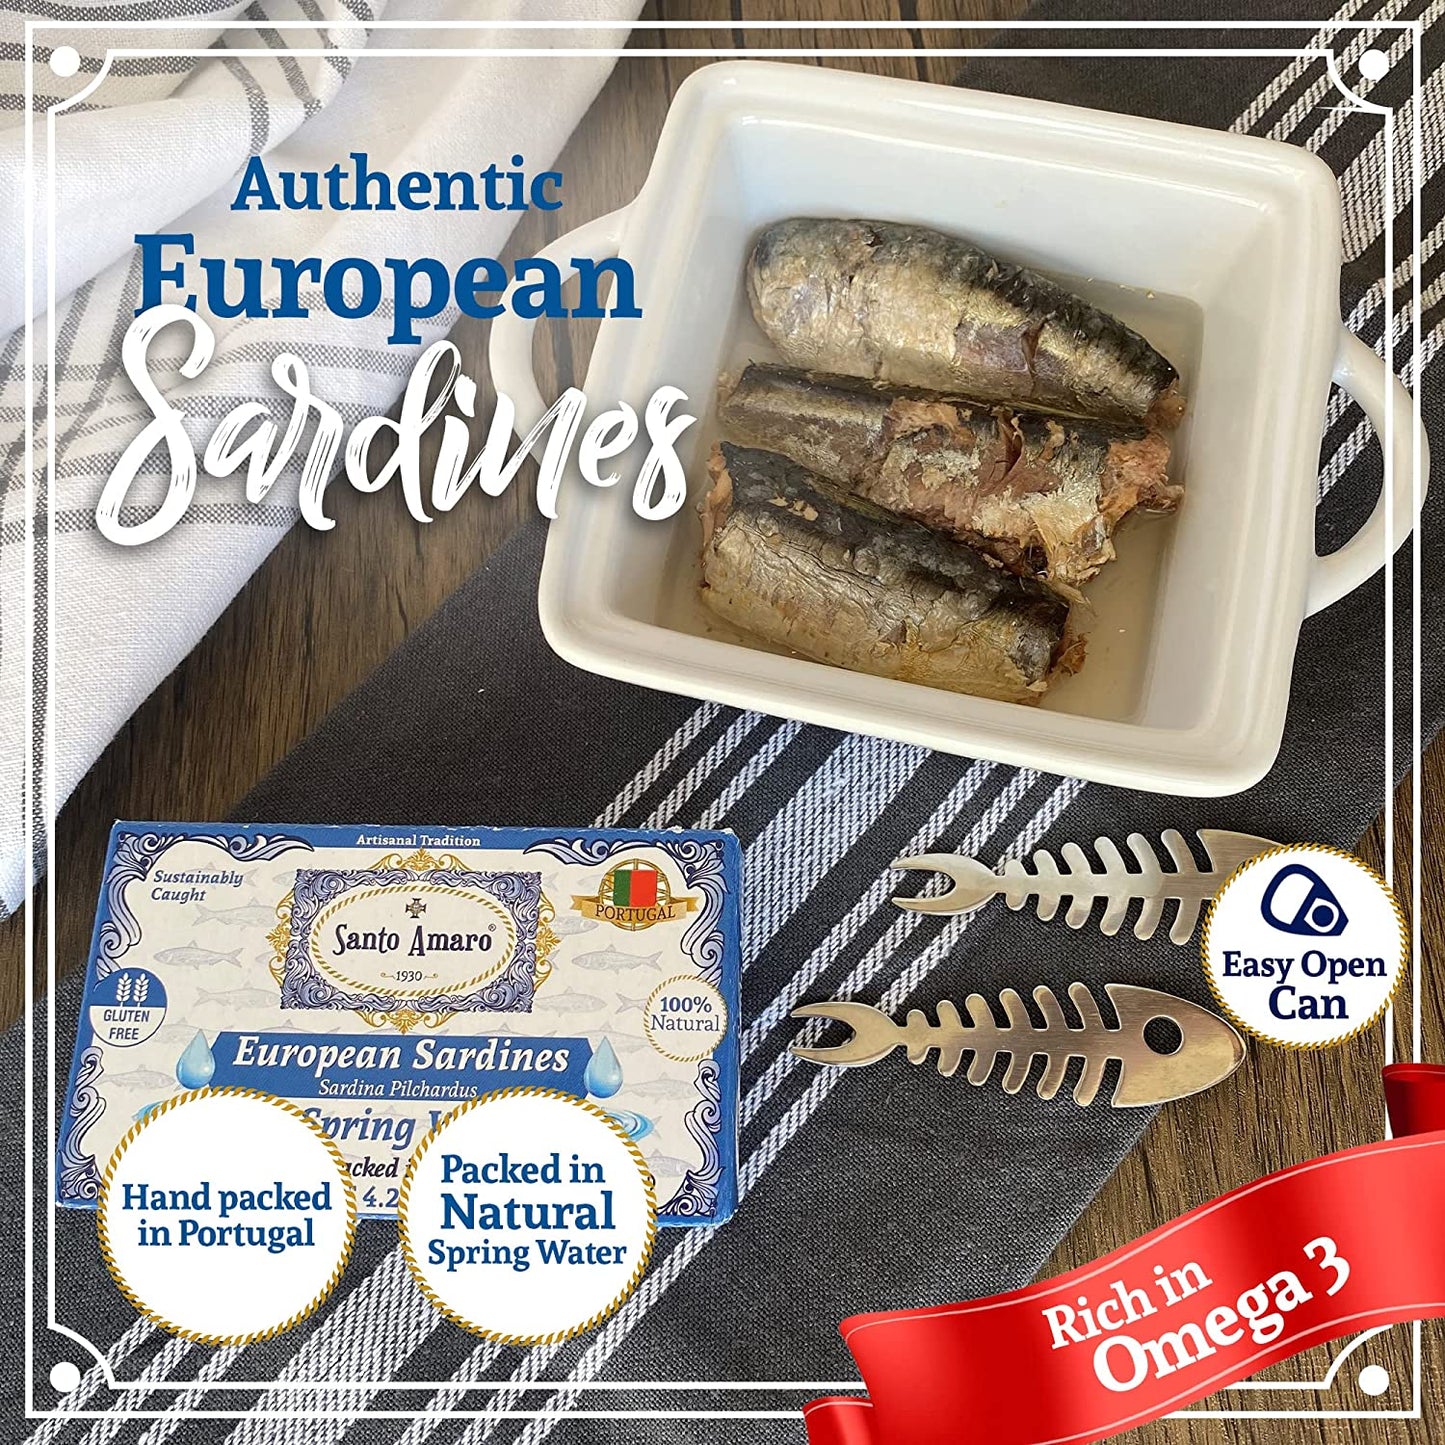 Santo Amaro – Authentic European Sardines in Water, Hand-Packed Canned Sardines Wild Caught Sardines in Water, Sea Salt, 140 Calories, Portuguese Sardines, Low Mercury, 19g Protein, Pack of 12